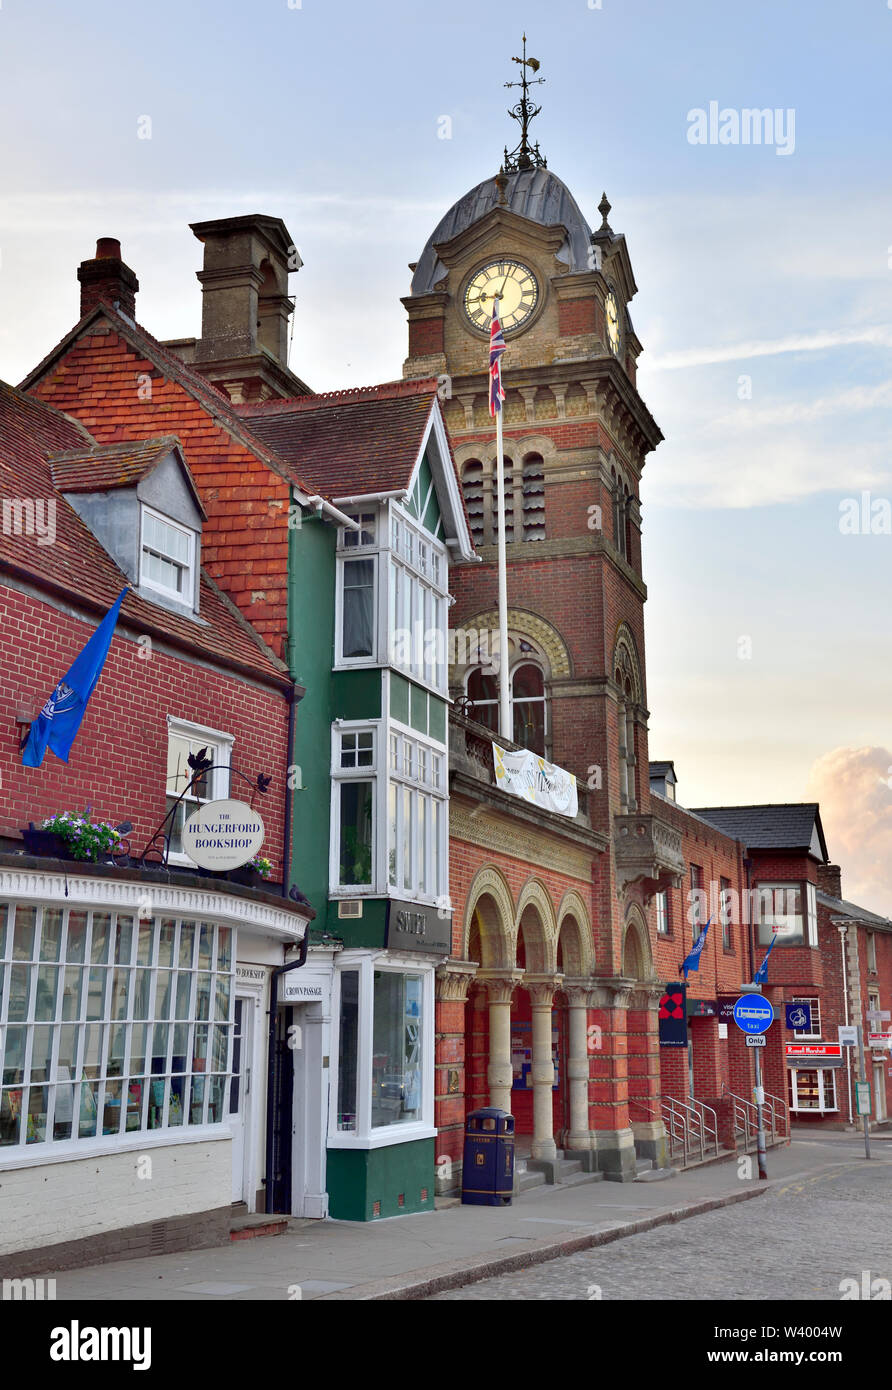 Town Hall with clock tower, Hungerford High Street, historic market town Berkshire, UK Stock Photo